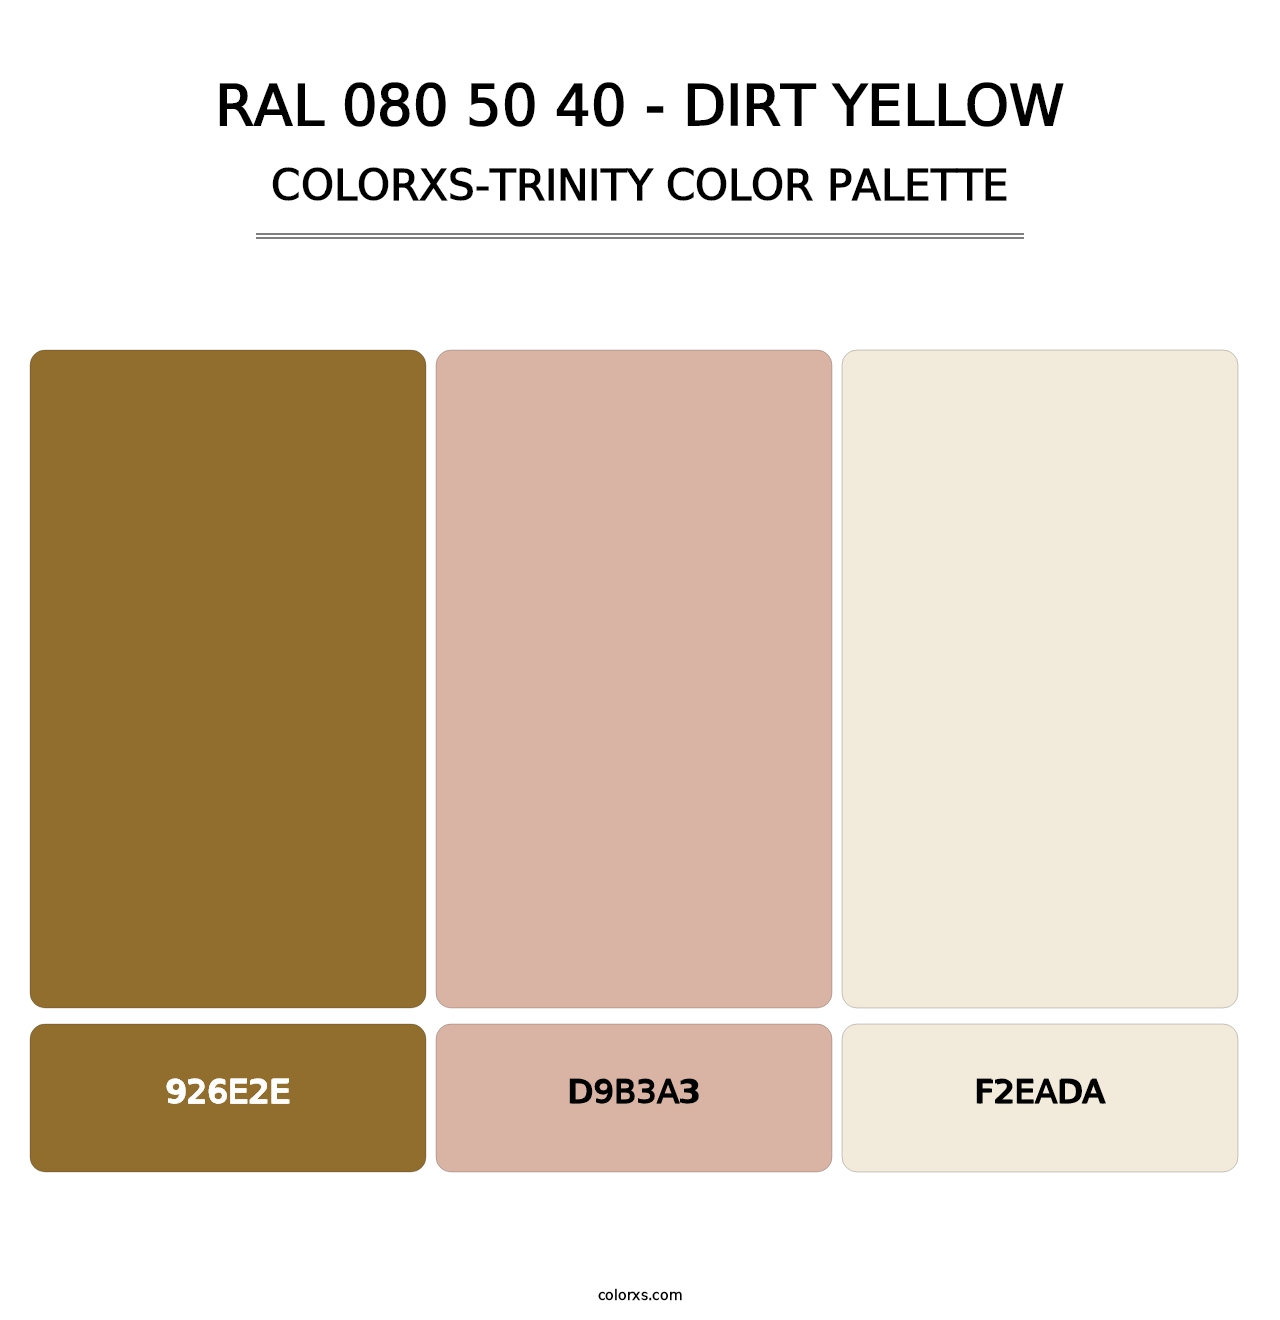 RAL 080 50 40 - Dirt Yellow - Colorxs Trinity Palette